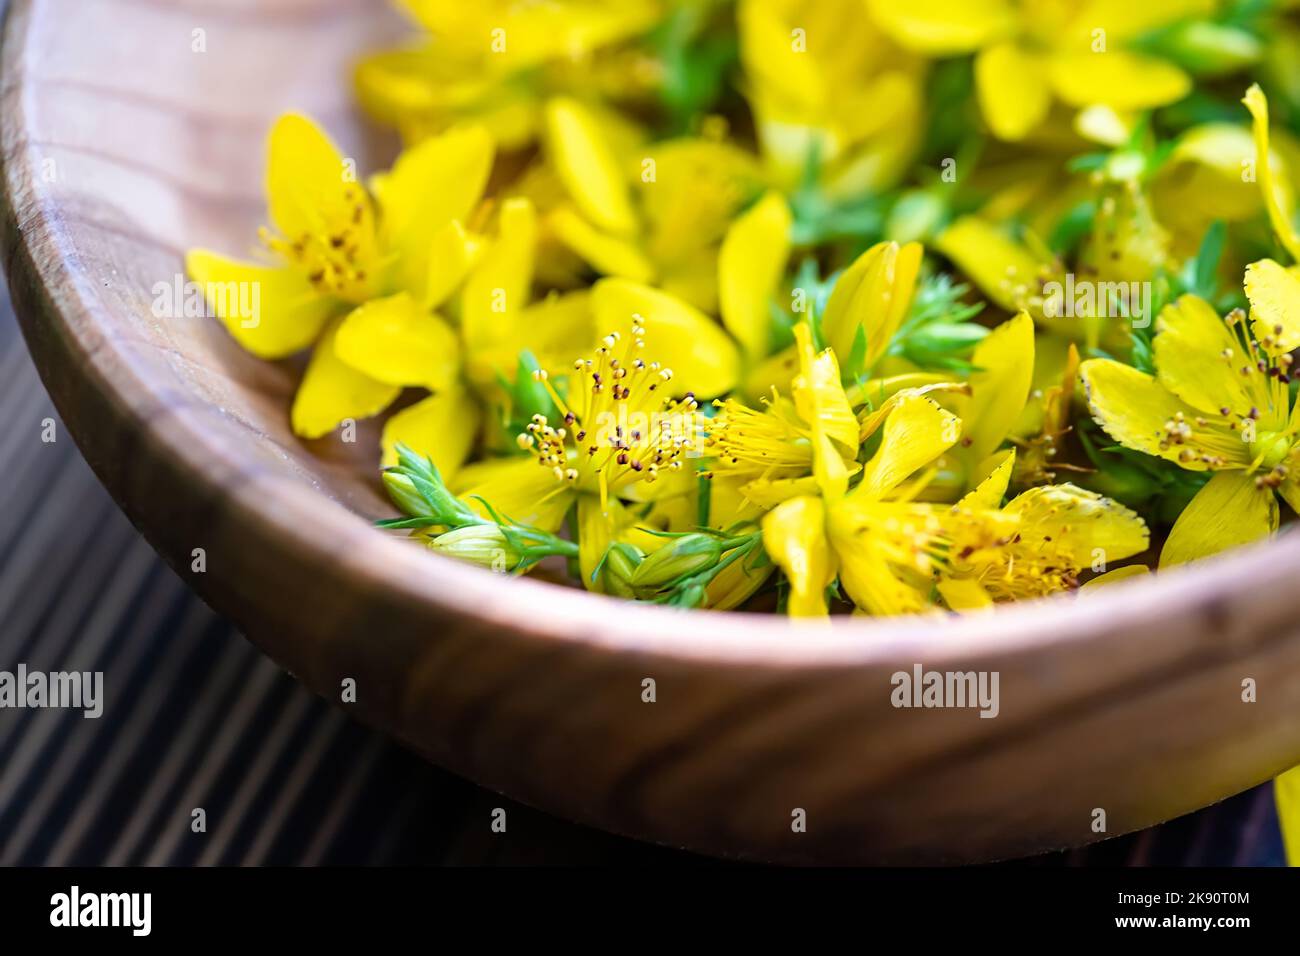 St. John's wort. Hypericum plants yellow flower used in alternative medicine in a wooden plate on a vintage table. Medicinal herbs Hypericum for Stock Photo